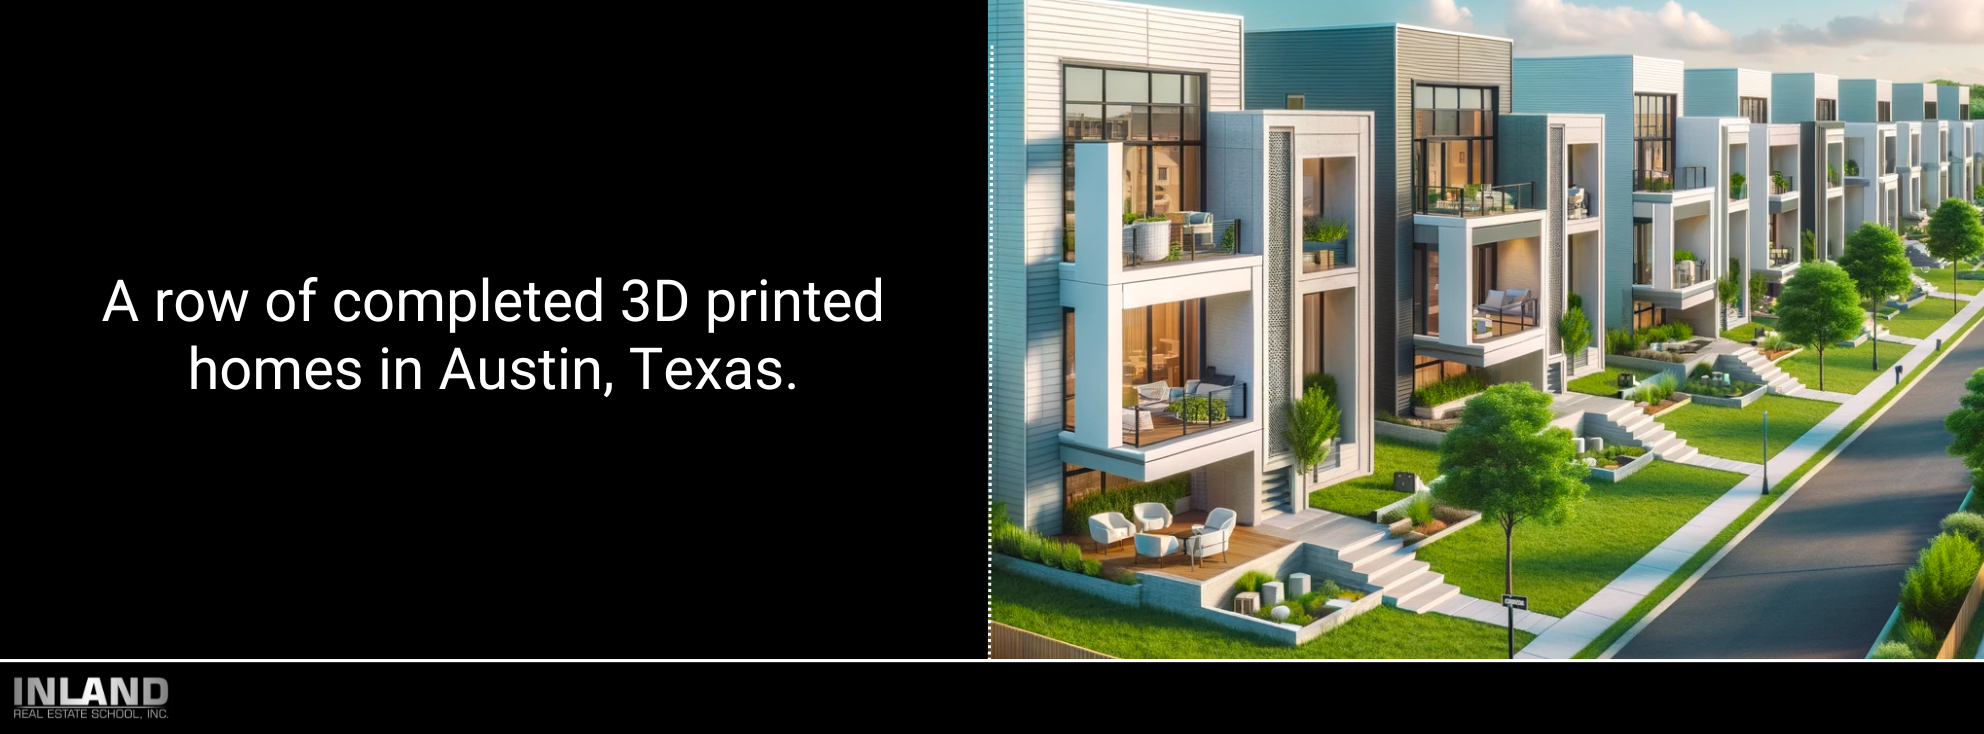 A row of completed 3D printed homes in Austin, Texas.